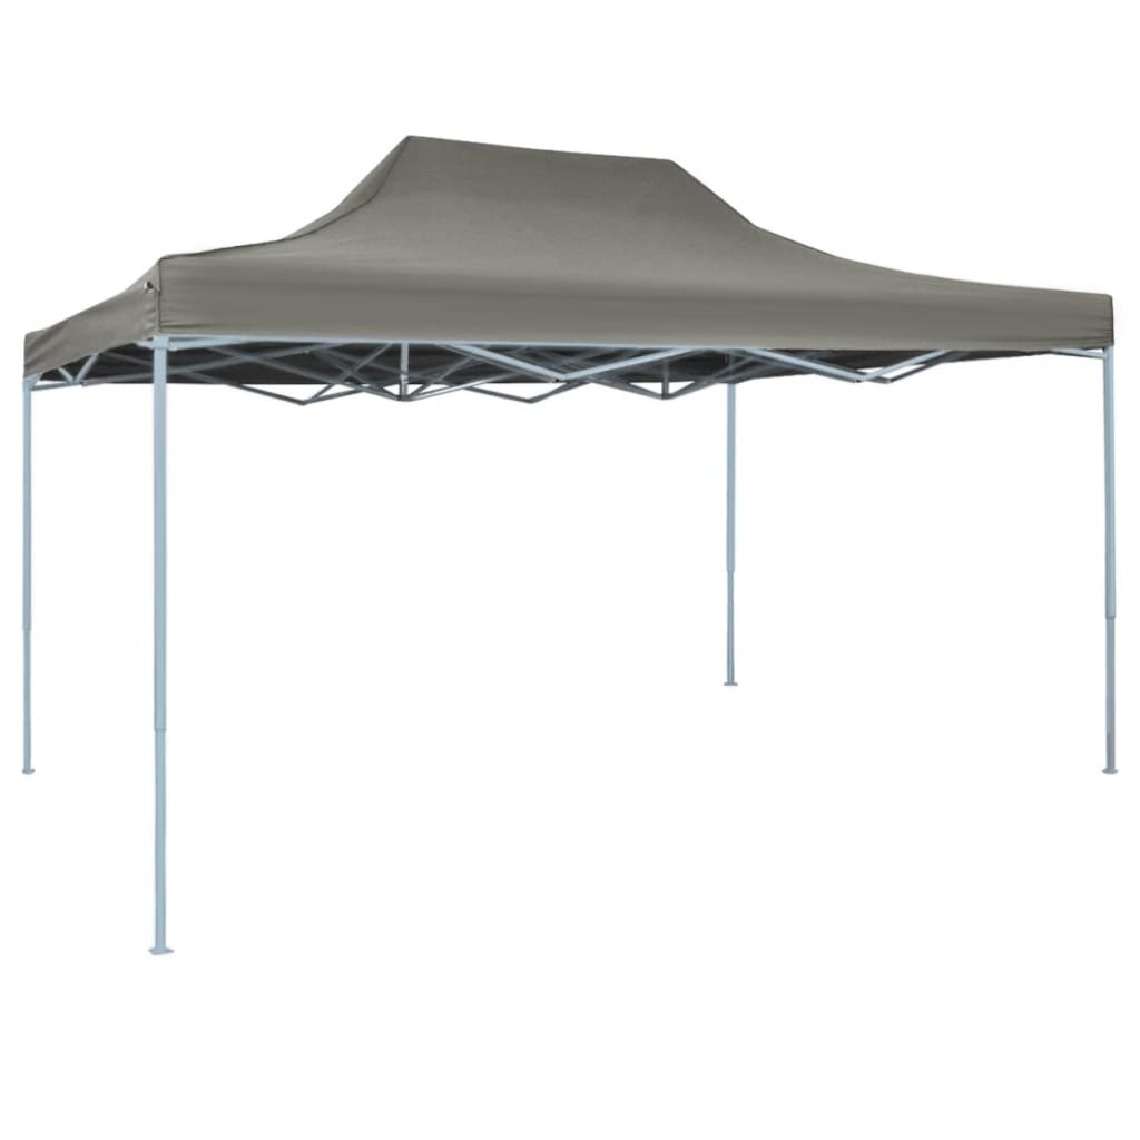 Chunhelife - Tente pliable escamotable 3 x 4,5 m Anthracite - Marquise, auvent